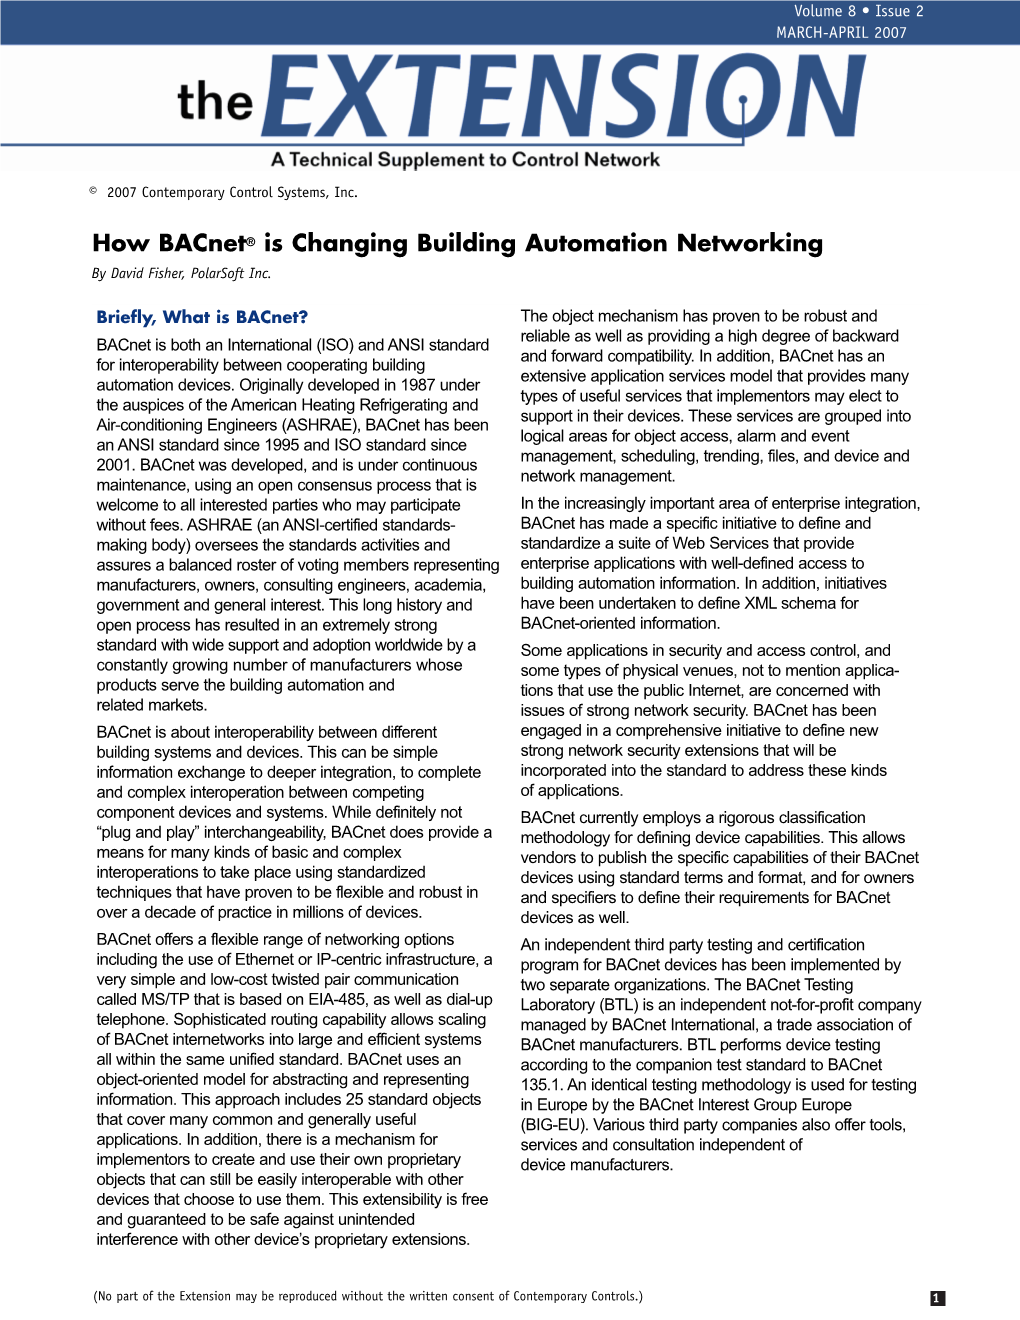 How Bacnet Is Changing Building Automation Networking